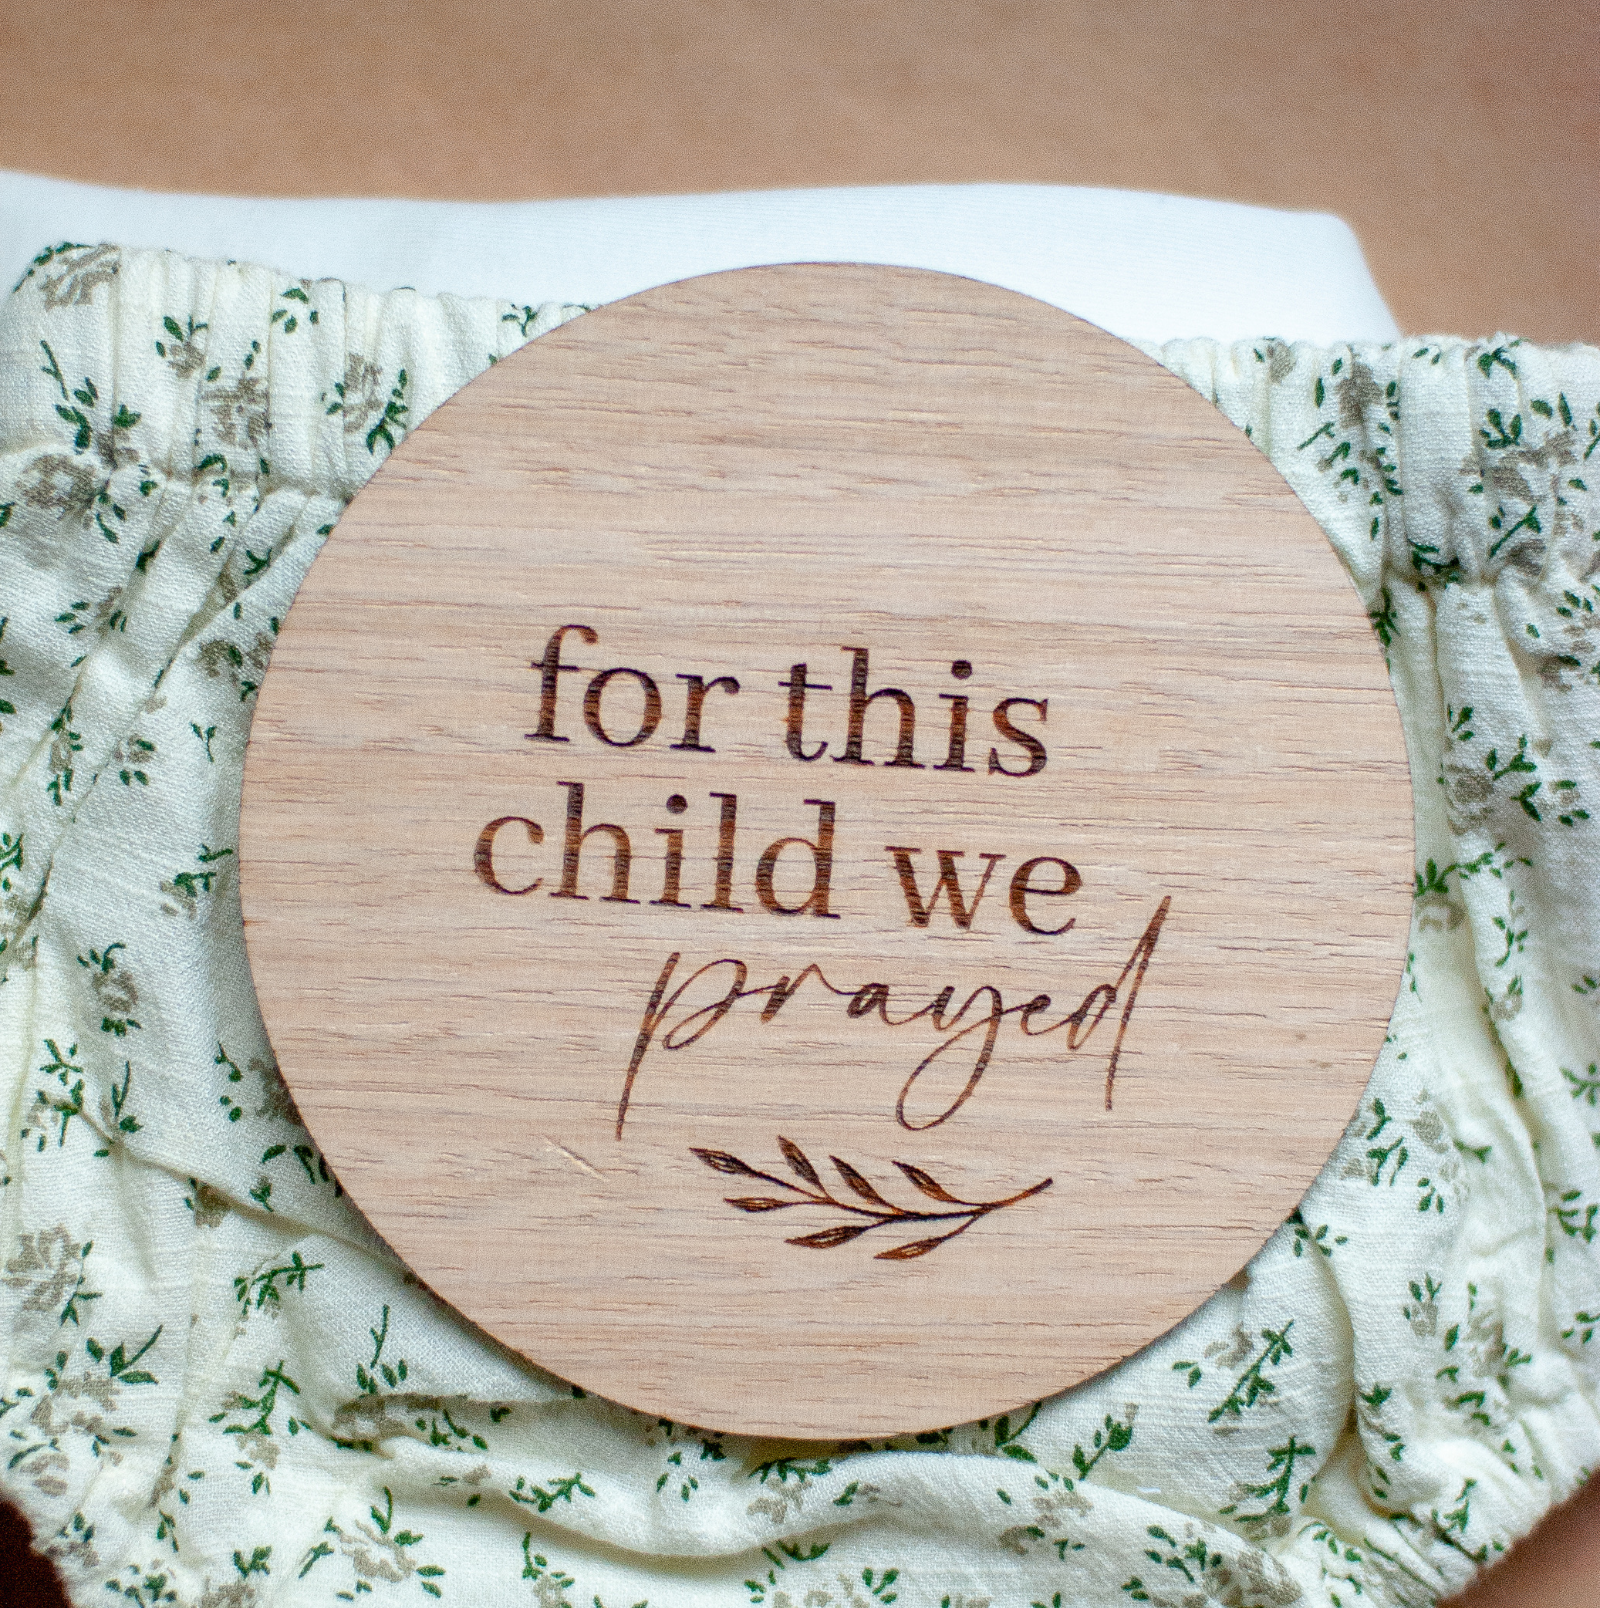 Christian pregnancy or birth announcement discs to use in photography or photots 